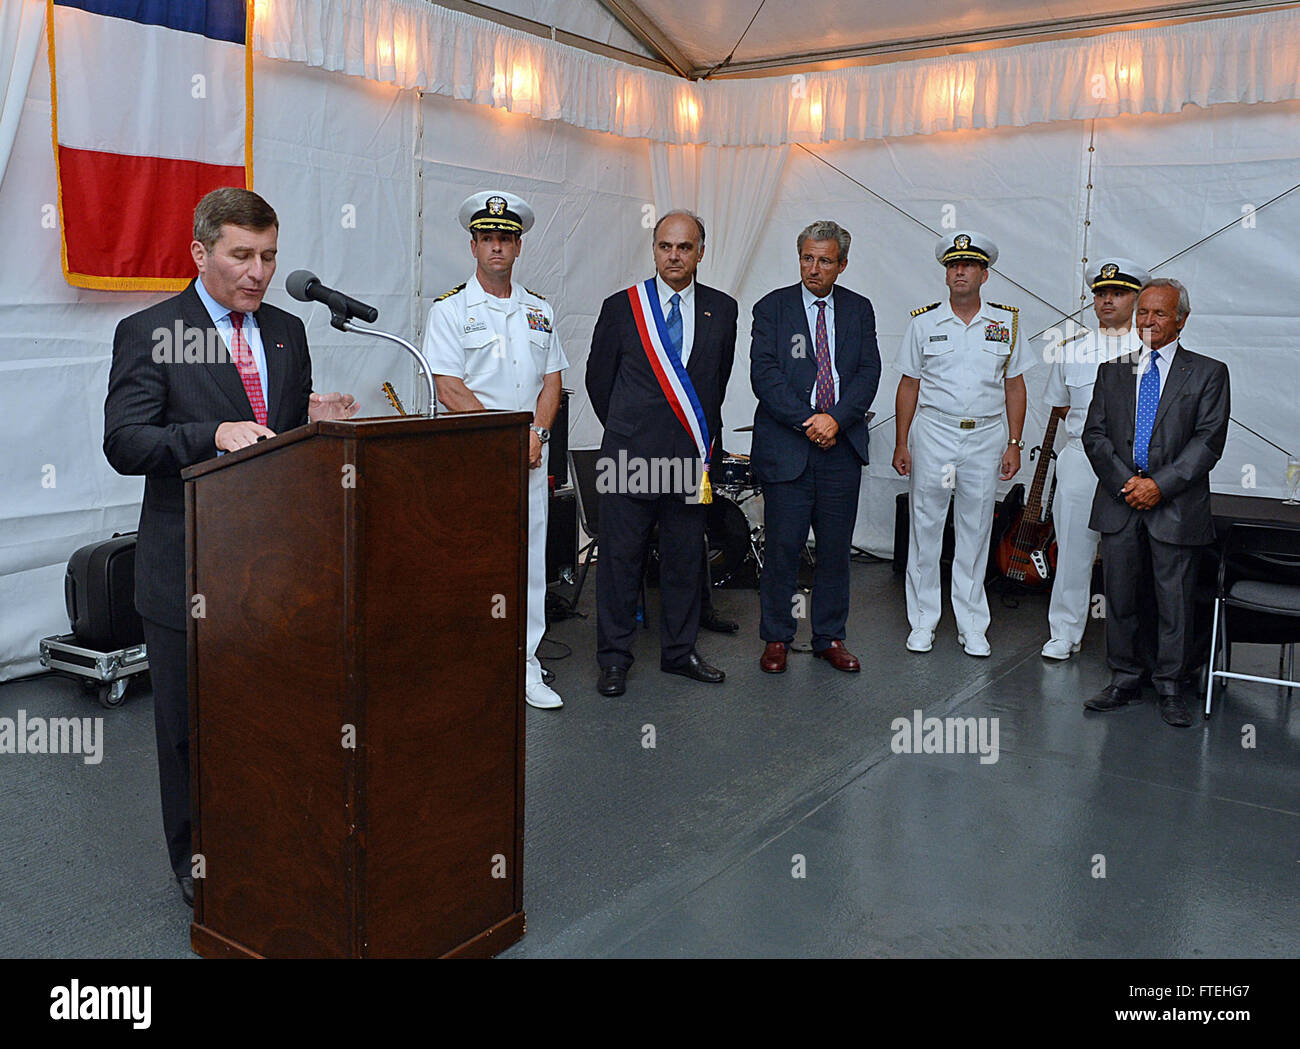 THEOULE-SUR-MER, France (August 14, 2013) – Charles Rivkin, left, United States Ambassador to France and Monaco addresses local residents and dignitaries on board the amphibious command ship USS Mount Whitney (LCC 20), during a reception in recognition of the 69th anniversary celebration of allied troops landing in Provence during World War II. This visit serves to continue U.S. 6th Fleet efforts to build global maritime partnerships with European nations and improve maritime safety and security. Stock Photo